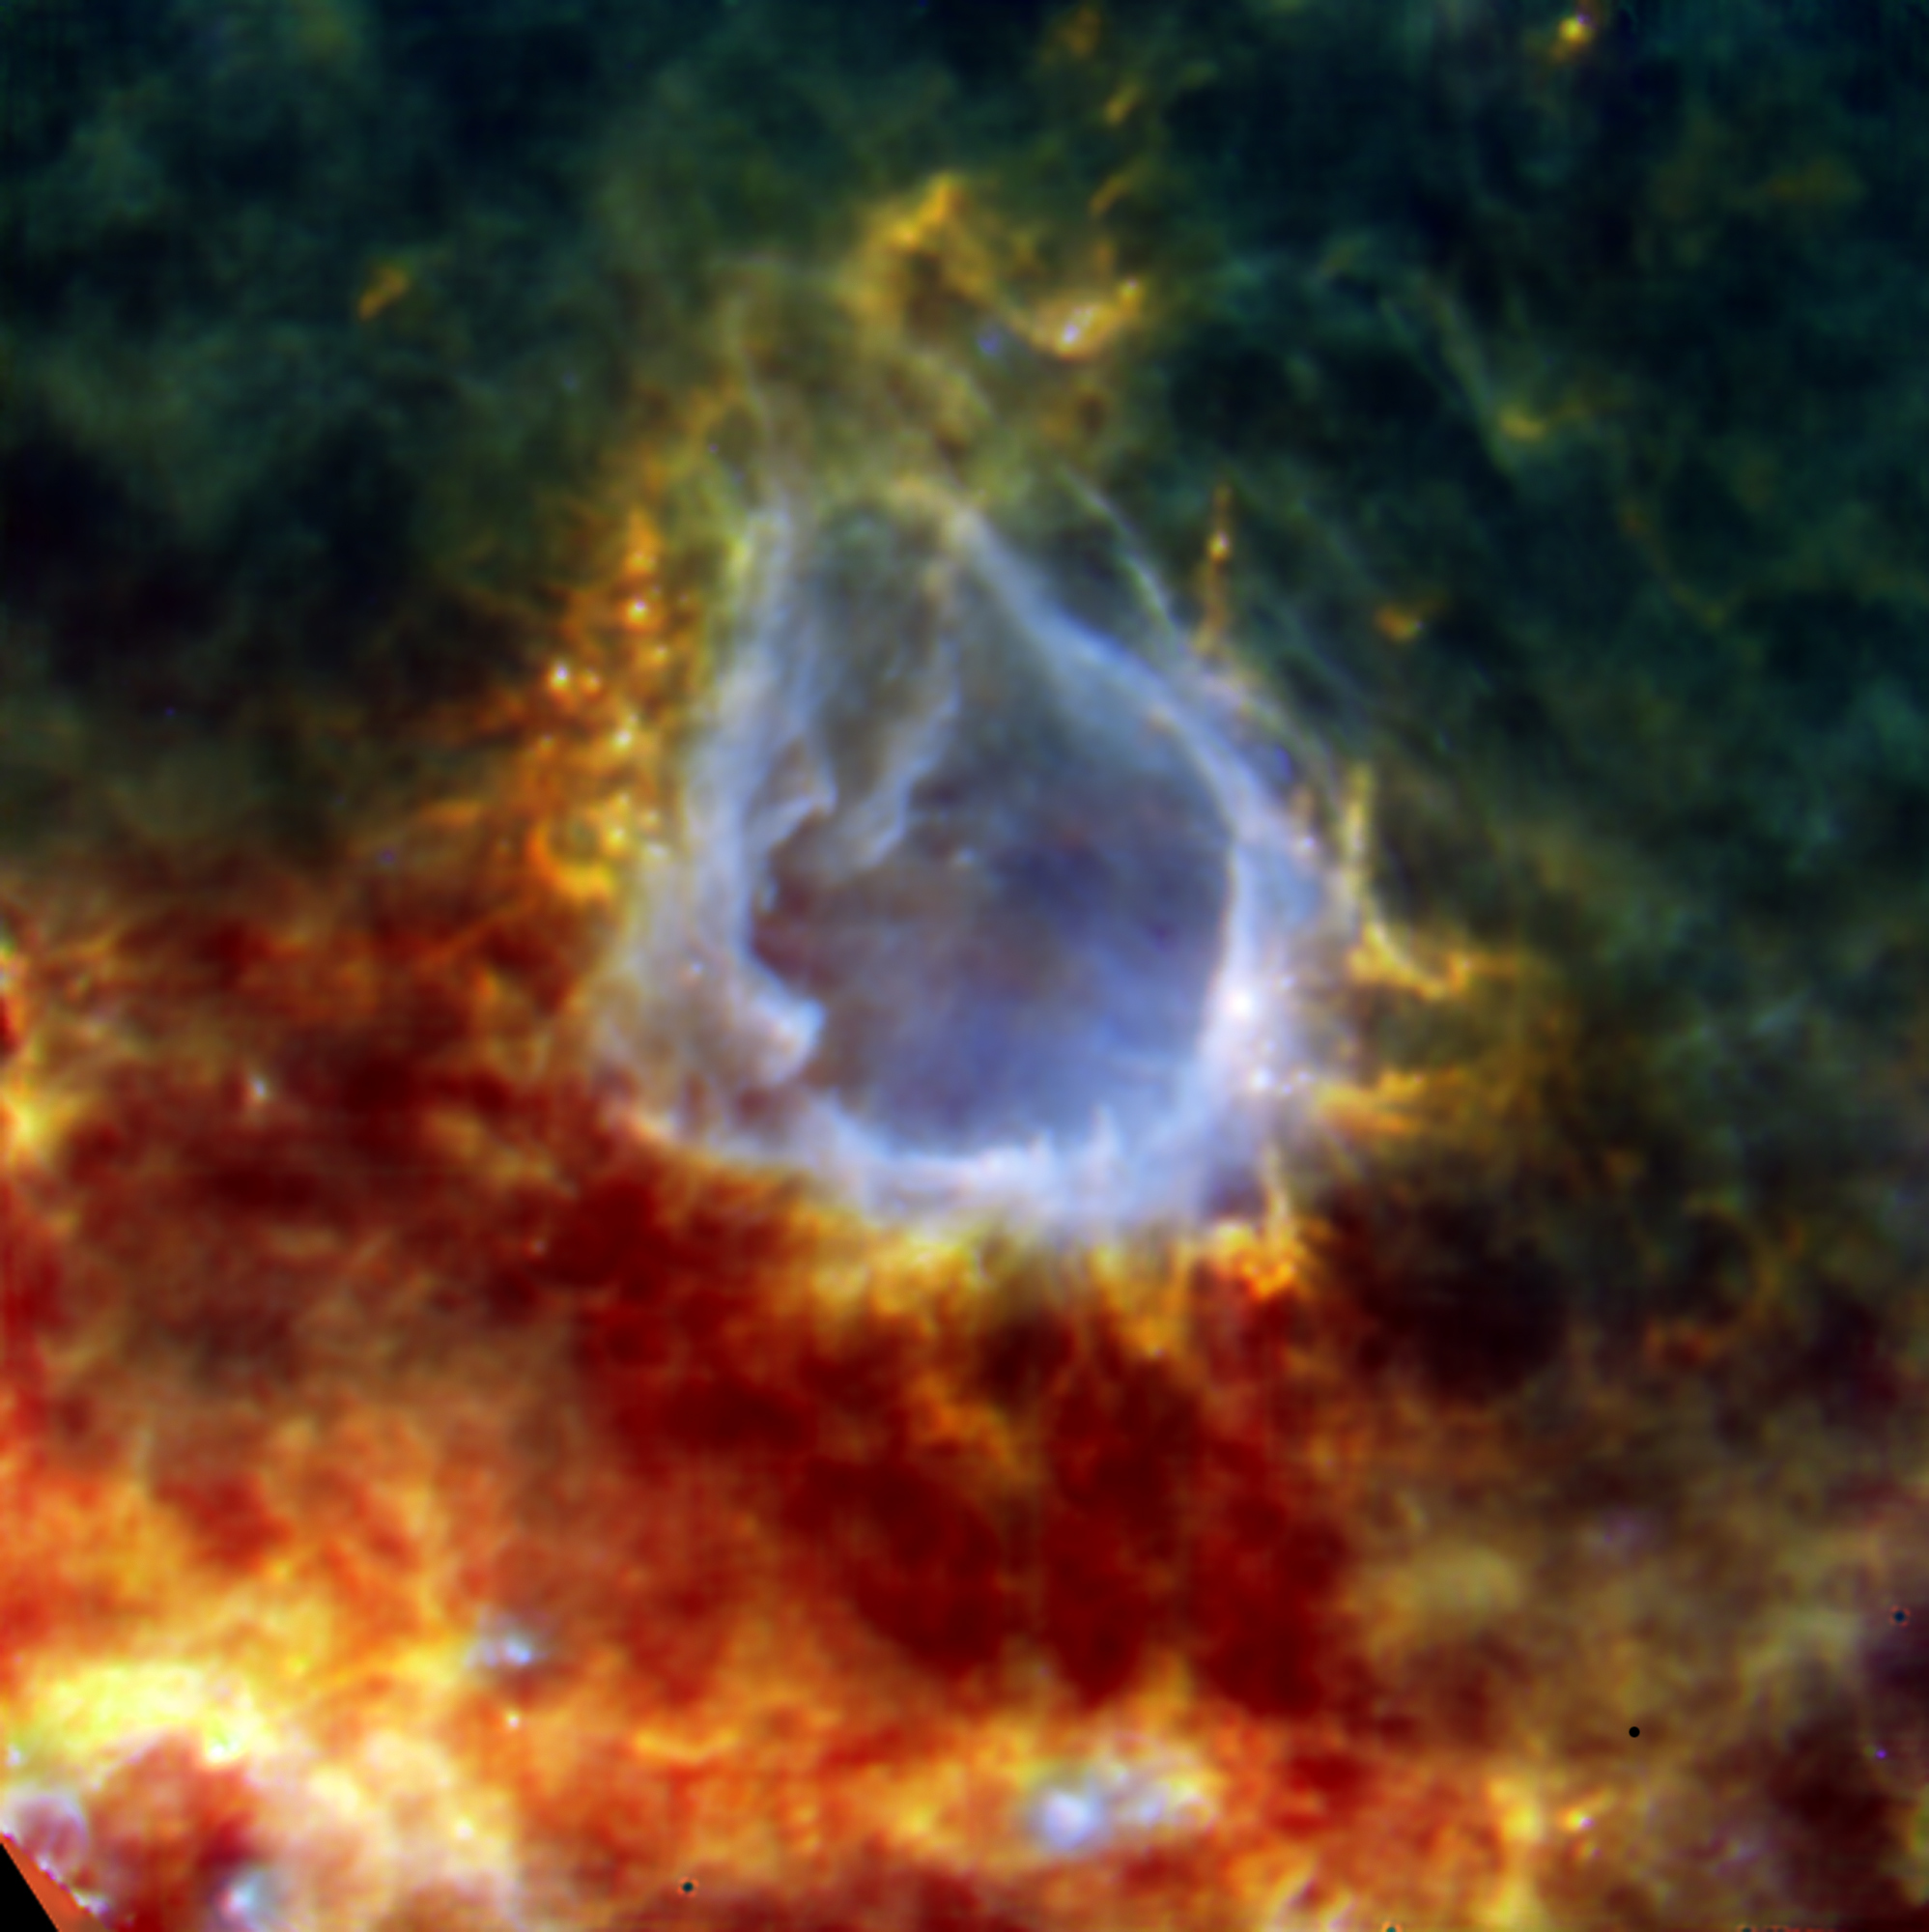 RCW 120 HII emission nebula : PACS100+160 µm + SPIRE250µm colour composite image Zavagno, A., et al., "Star formation triggered by the Galactic HII region RCW 120", A&A, 2010